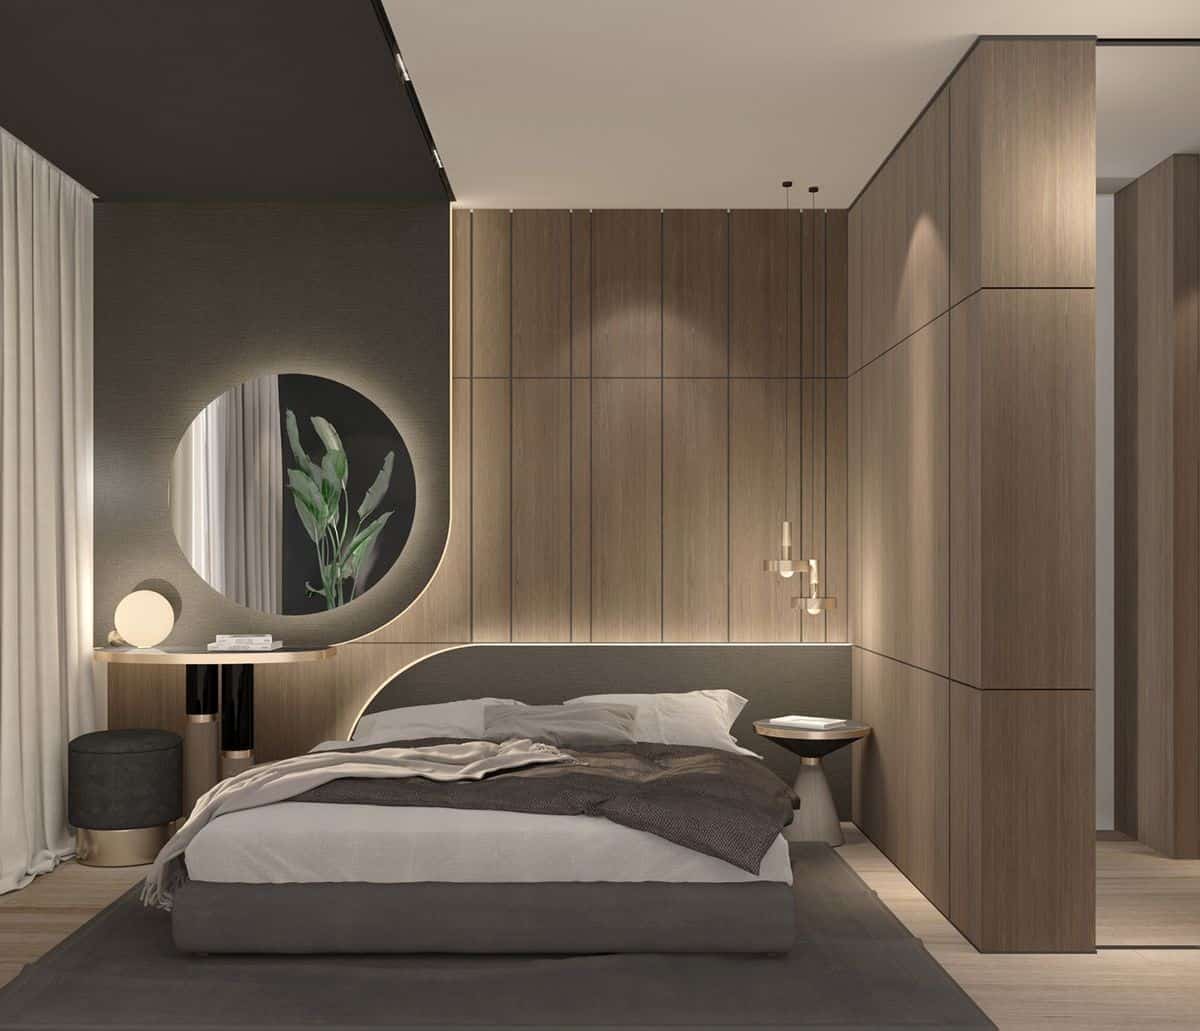  A mid-century modern bedroom layout with wood wall and accent lighting; bedroom wall tiles